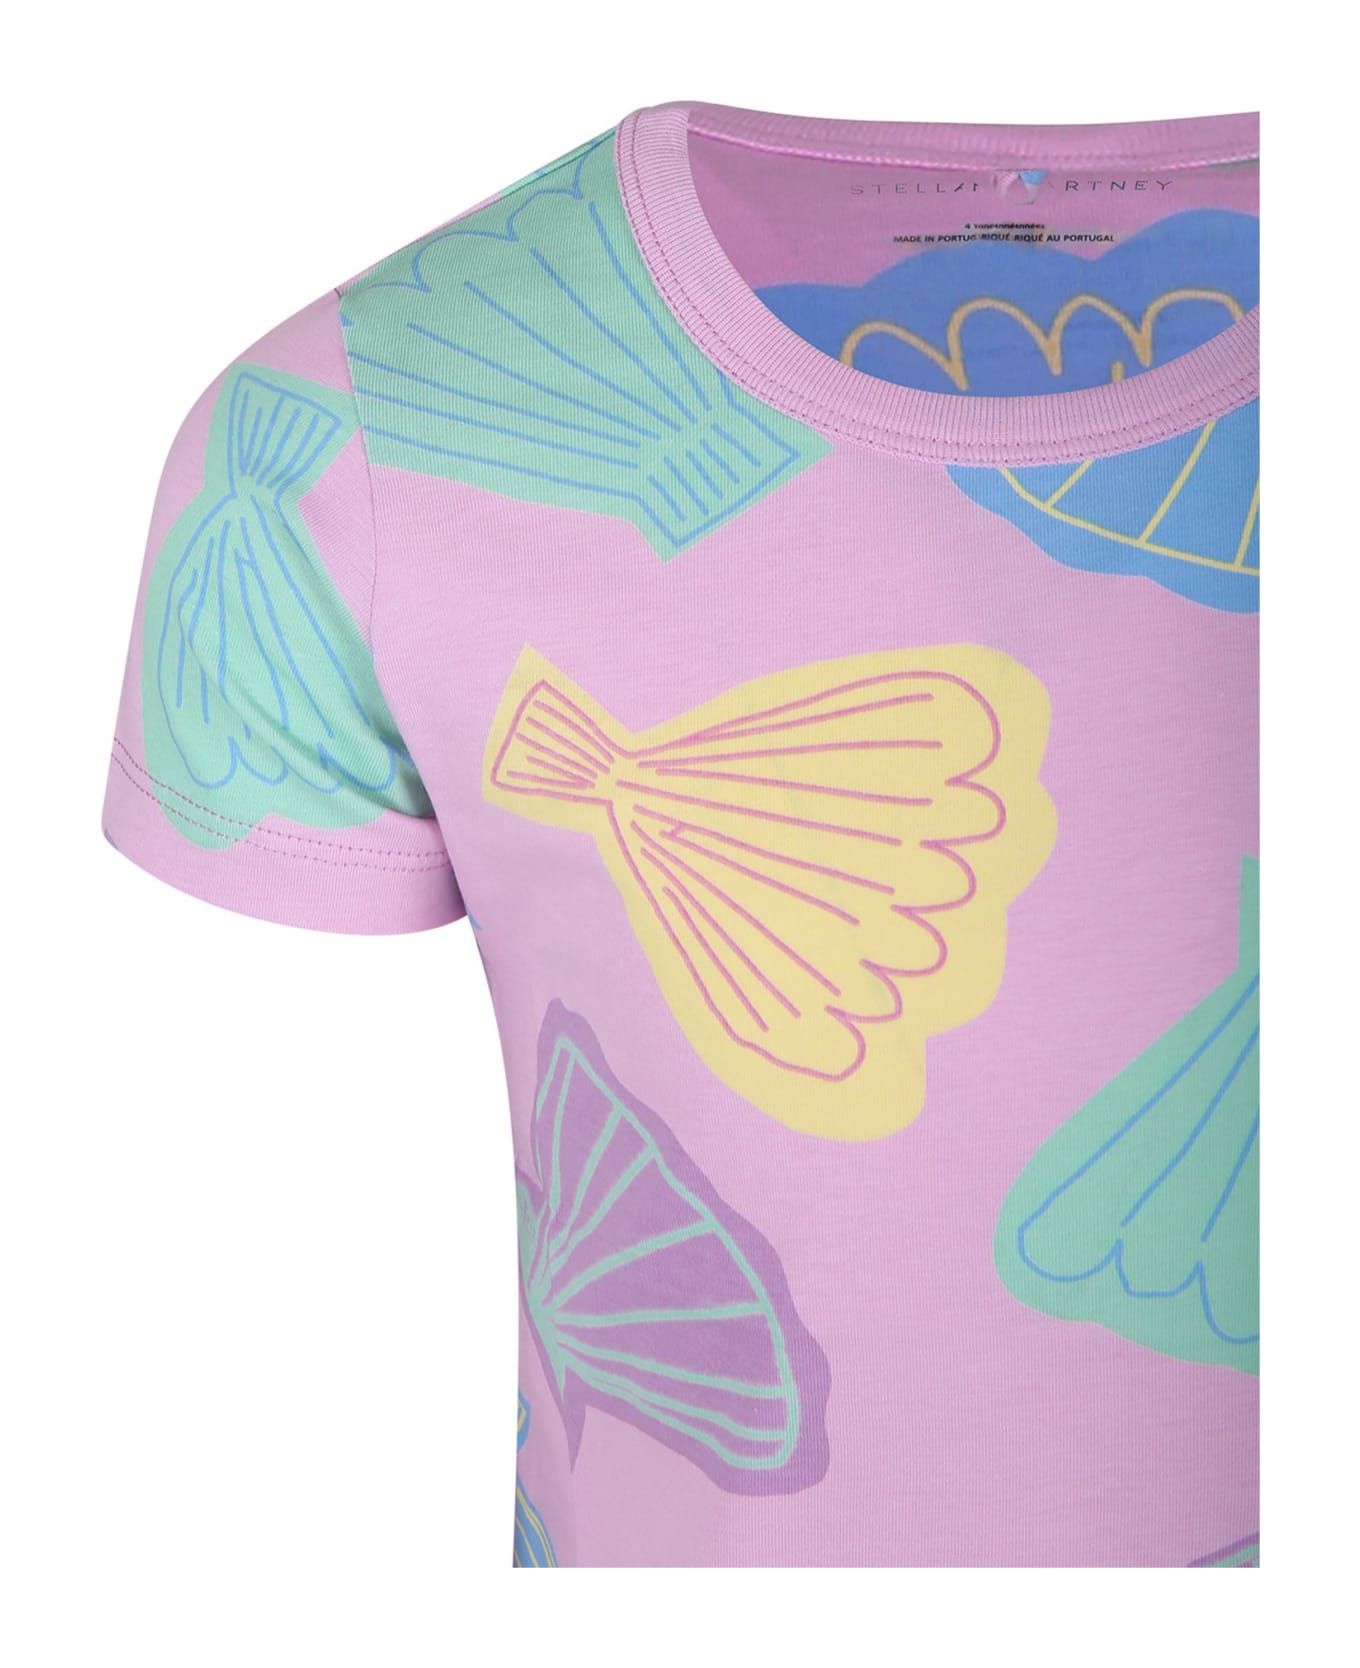 Stella McCartney Kids Pink T-shirt For Girl With Shell Print - Pink